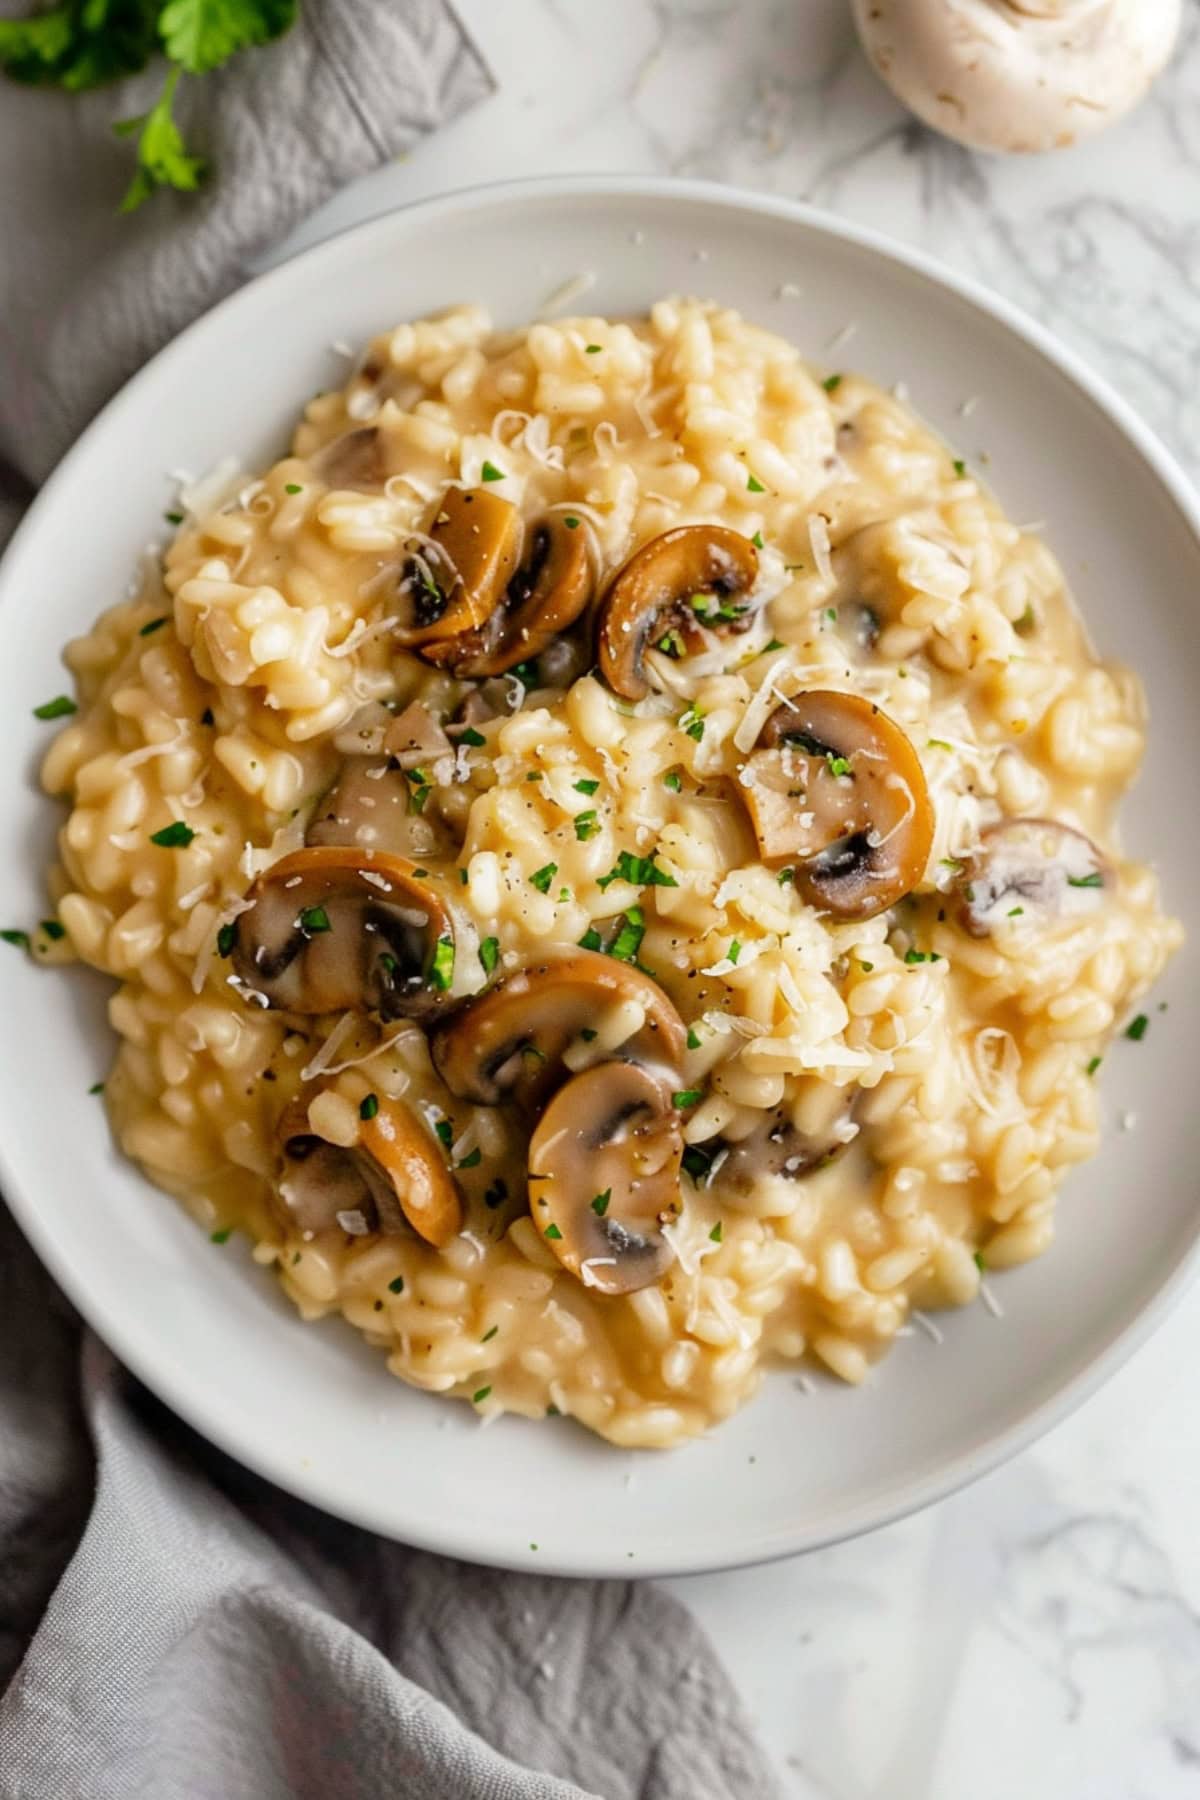 A creamy plate of mushroom risotto garnished with fresh parsley and grated Parmesan cheese.